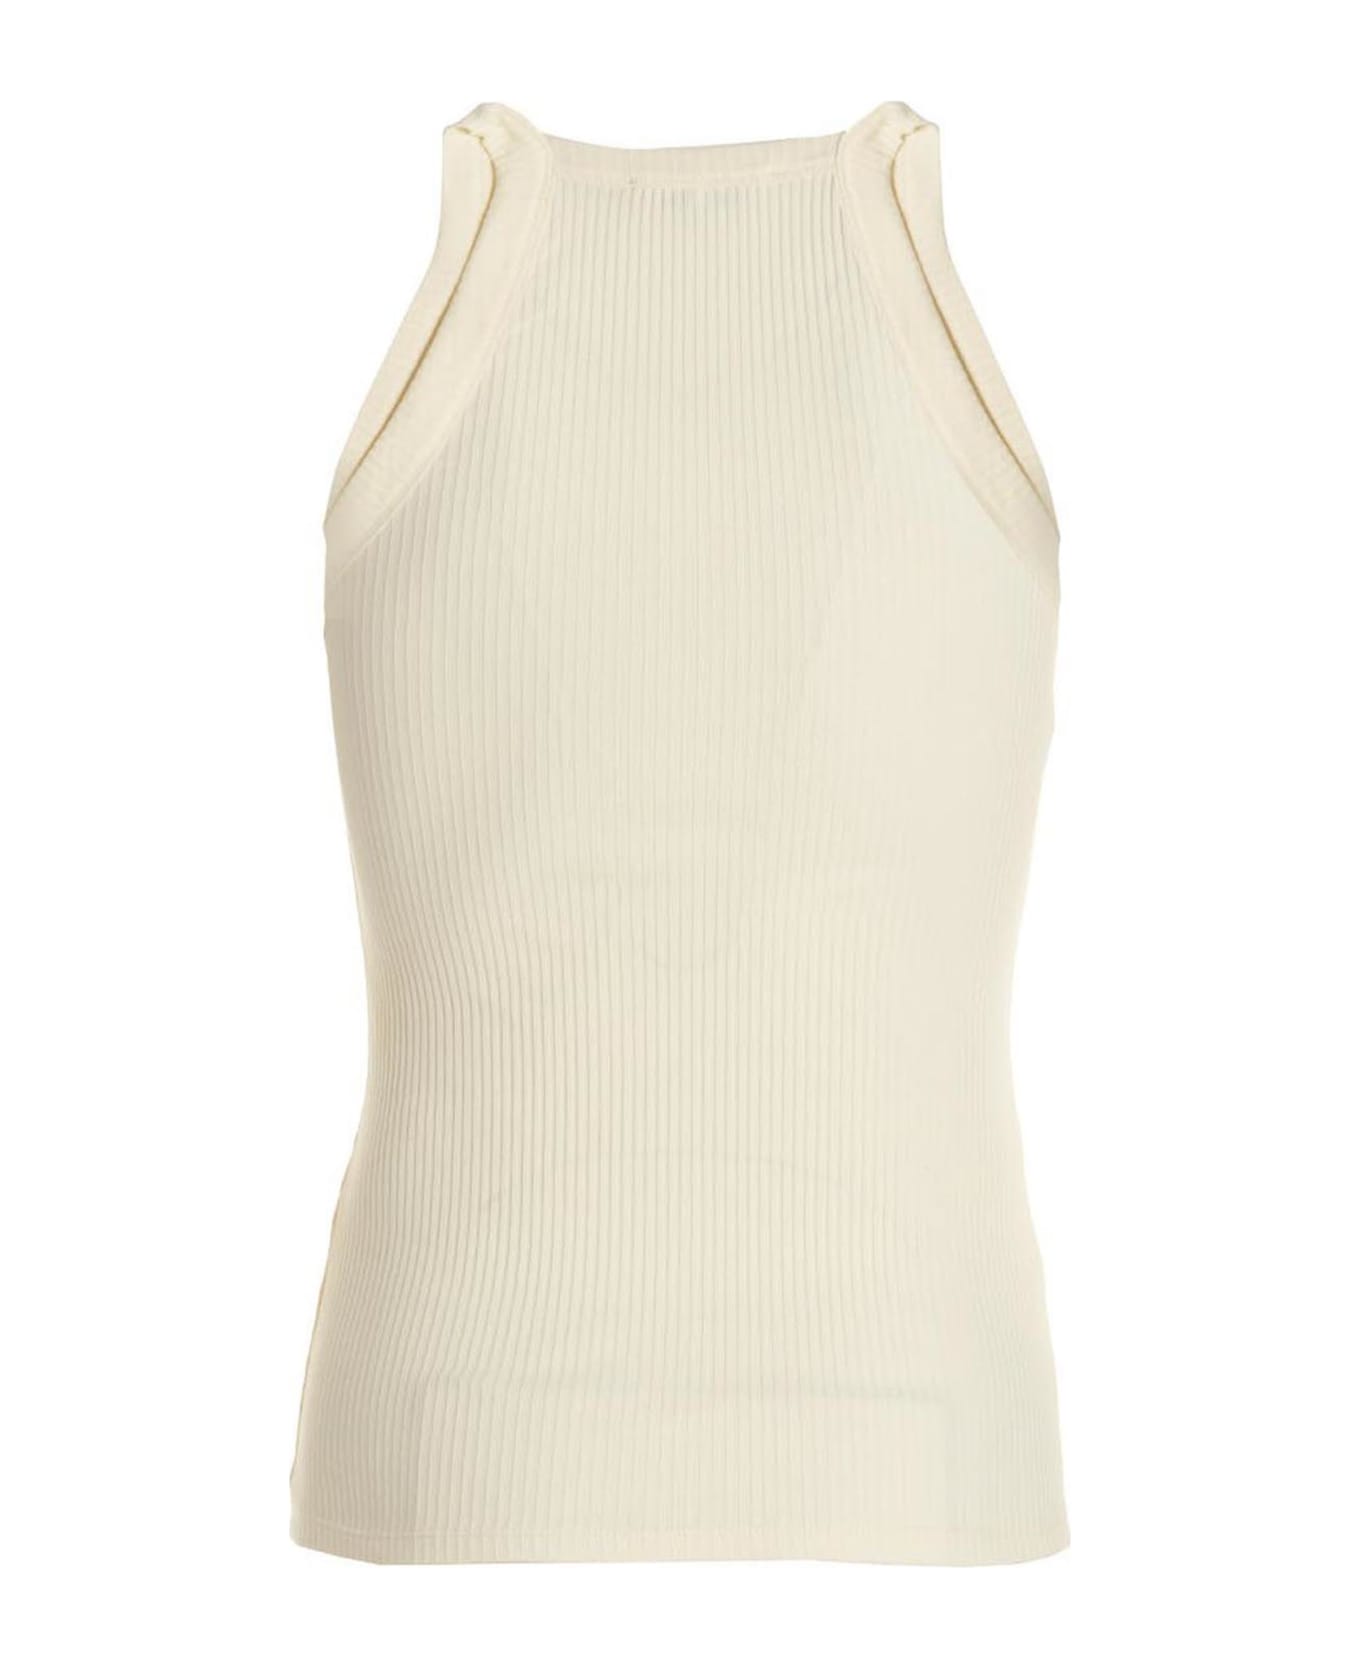 Wales Bonner Groove Tank Top - 100 IVORY タンクトップ